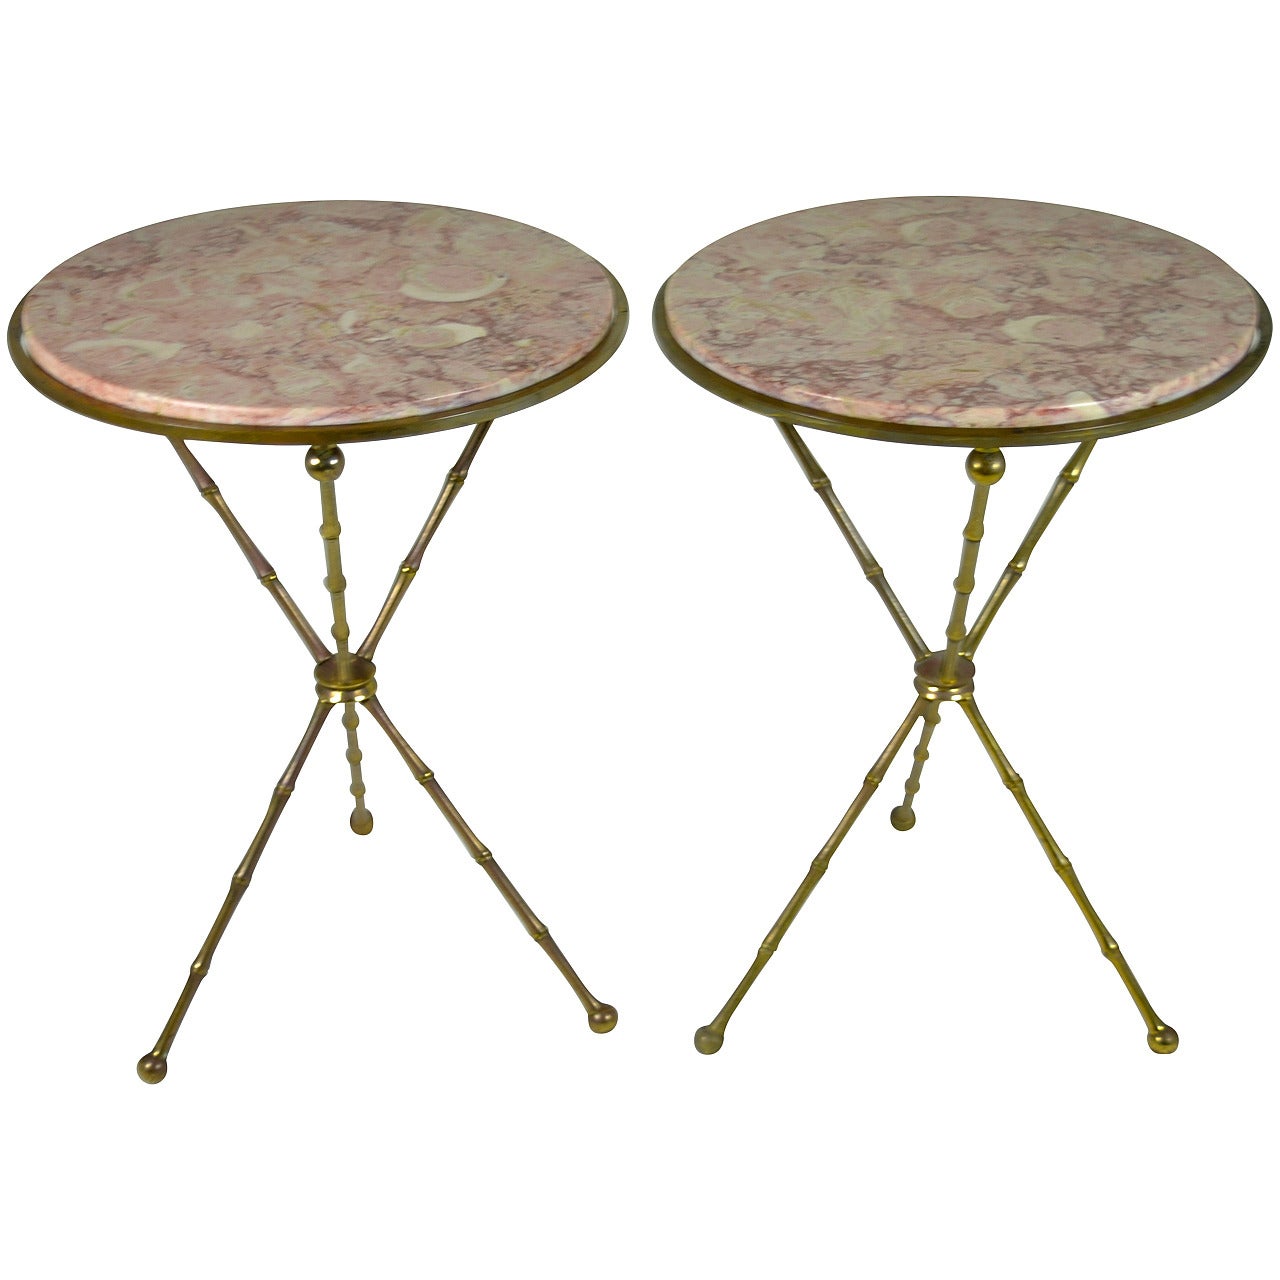 Pair of Brass Faux Bamboo and Marble Gueridon